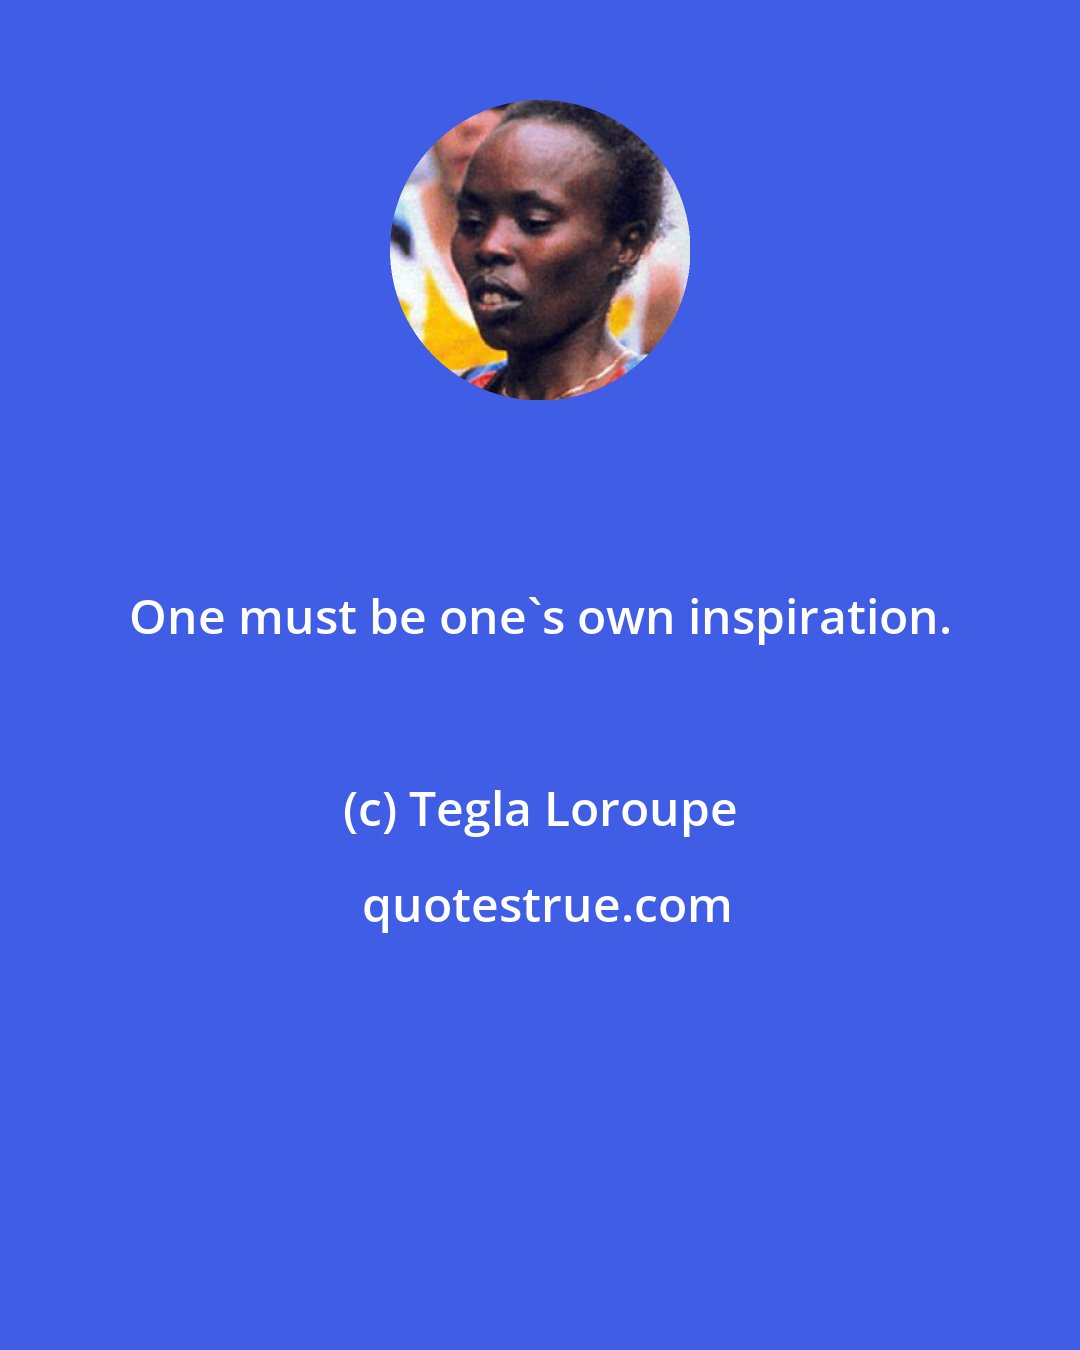 Tegla Loroupe: One must be one's own inspiration.